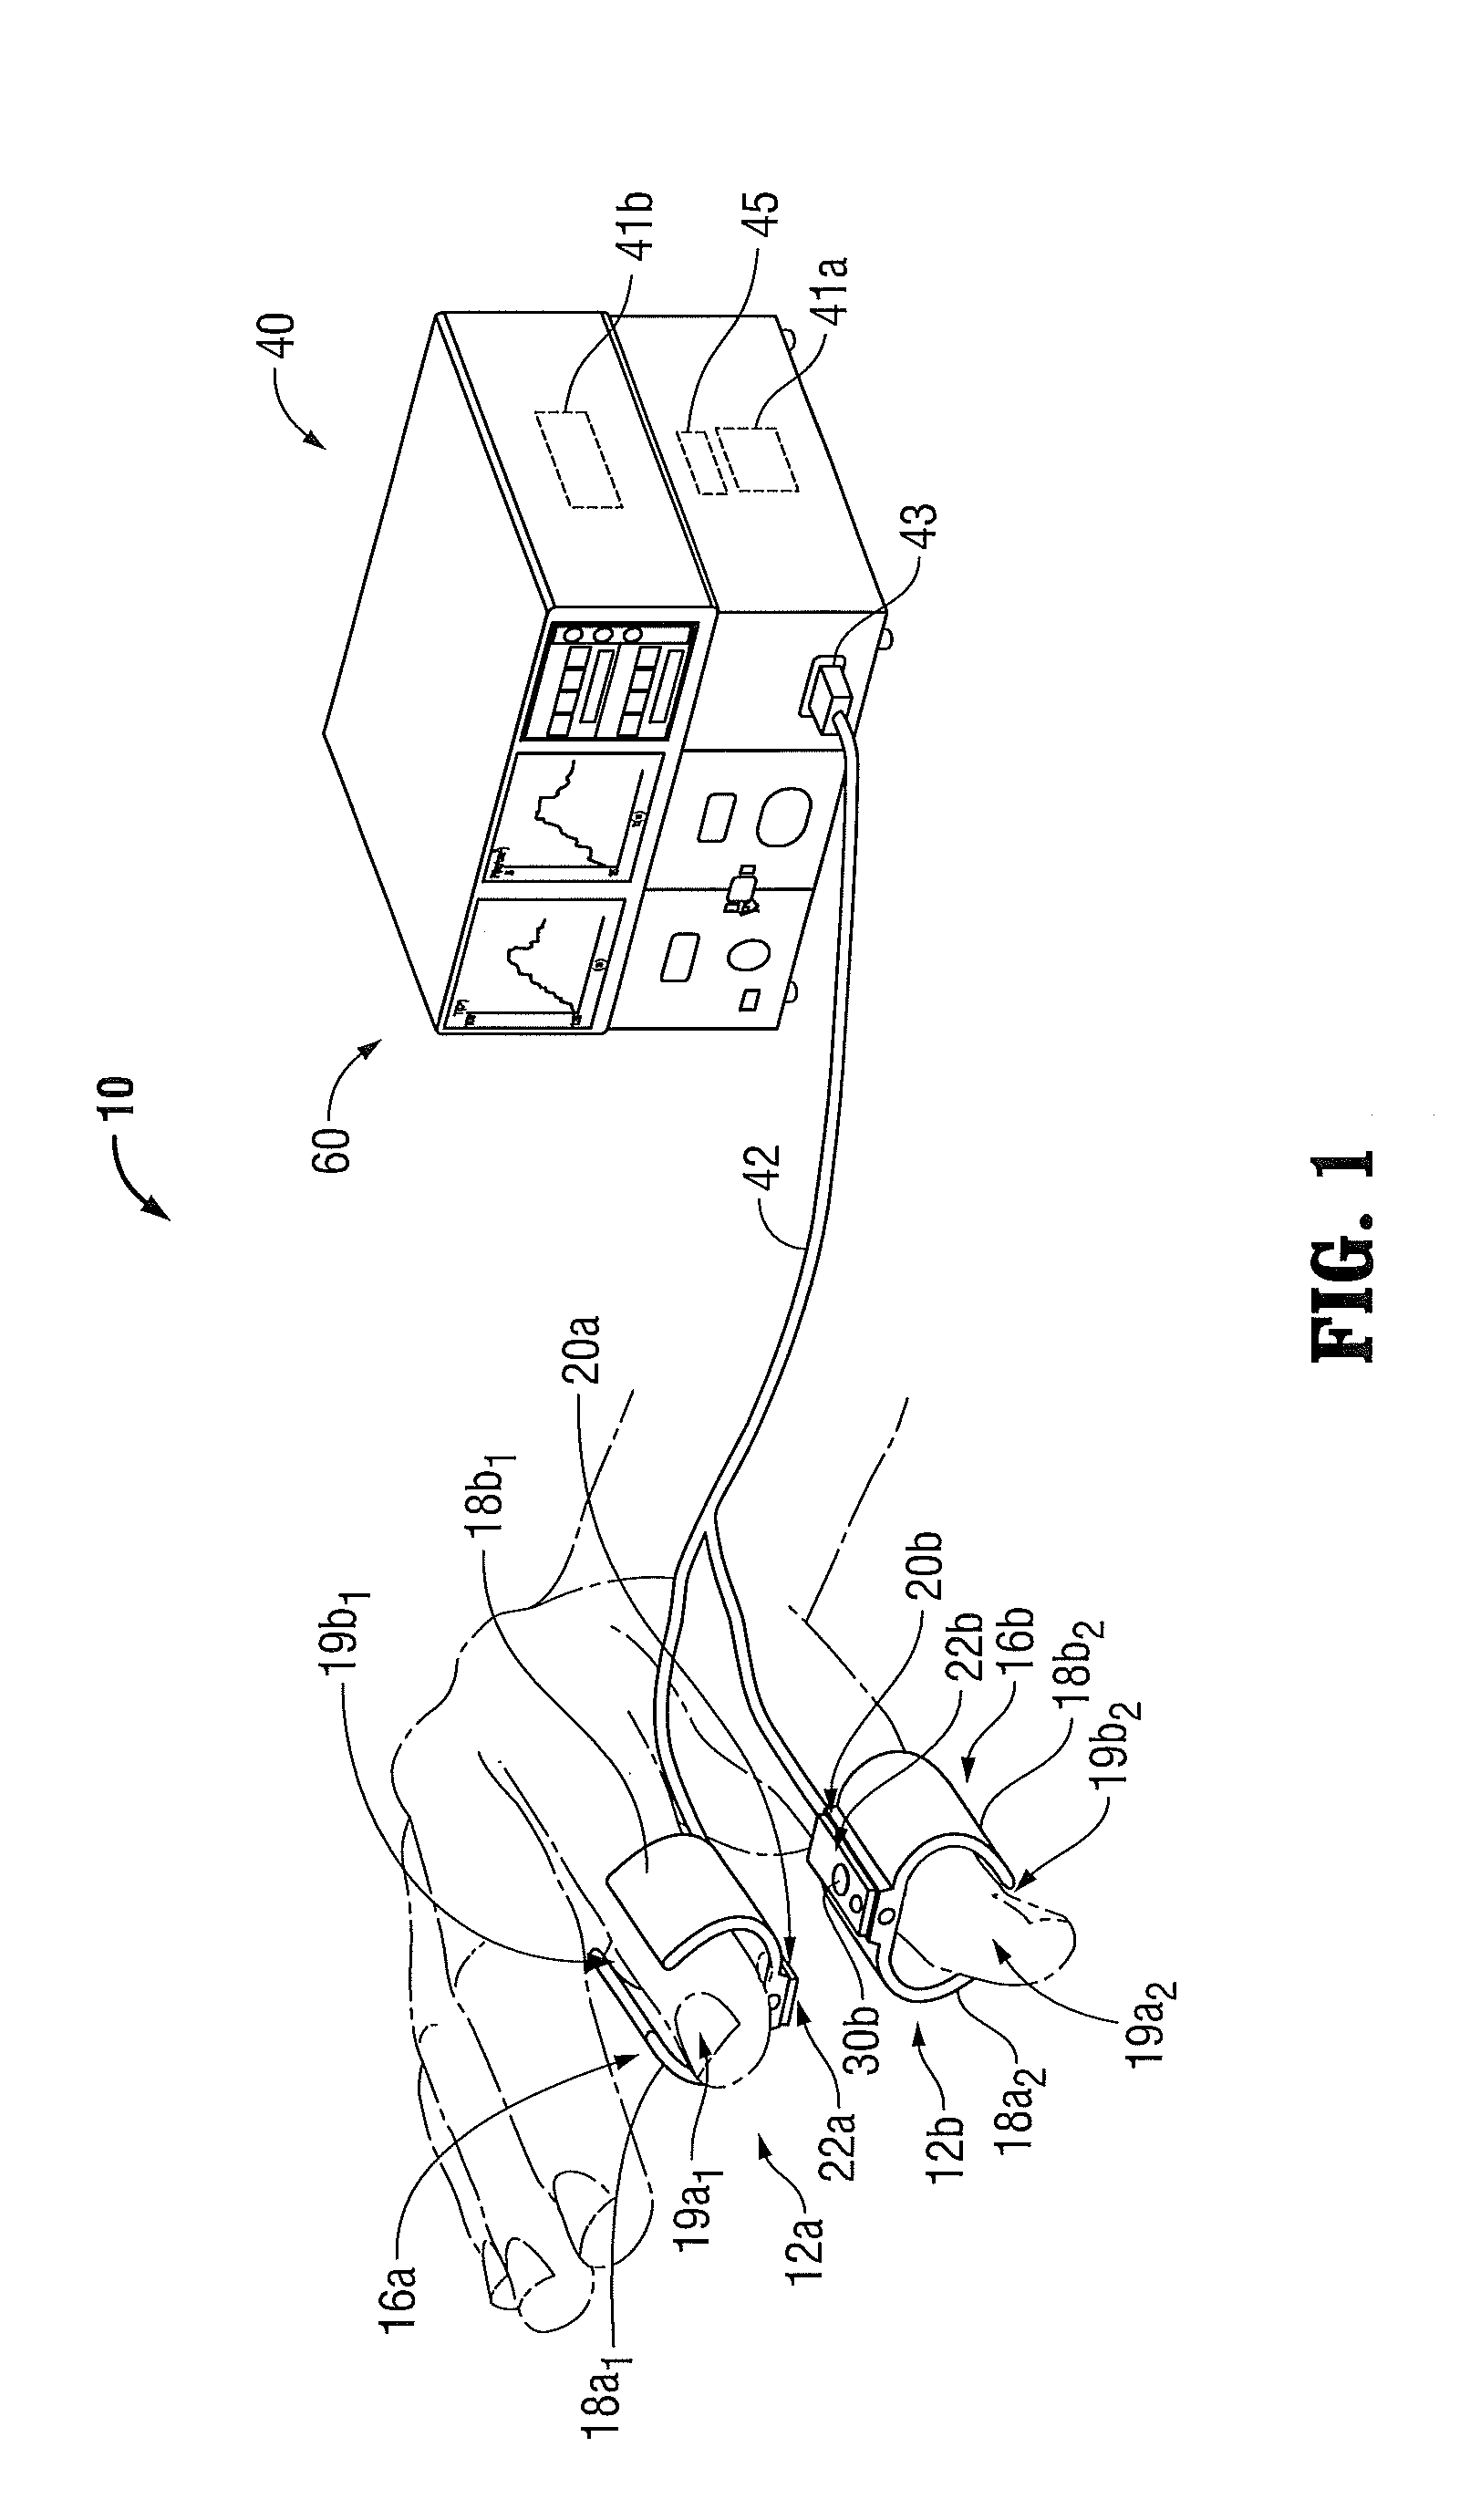 Finger-mountable ablation device